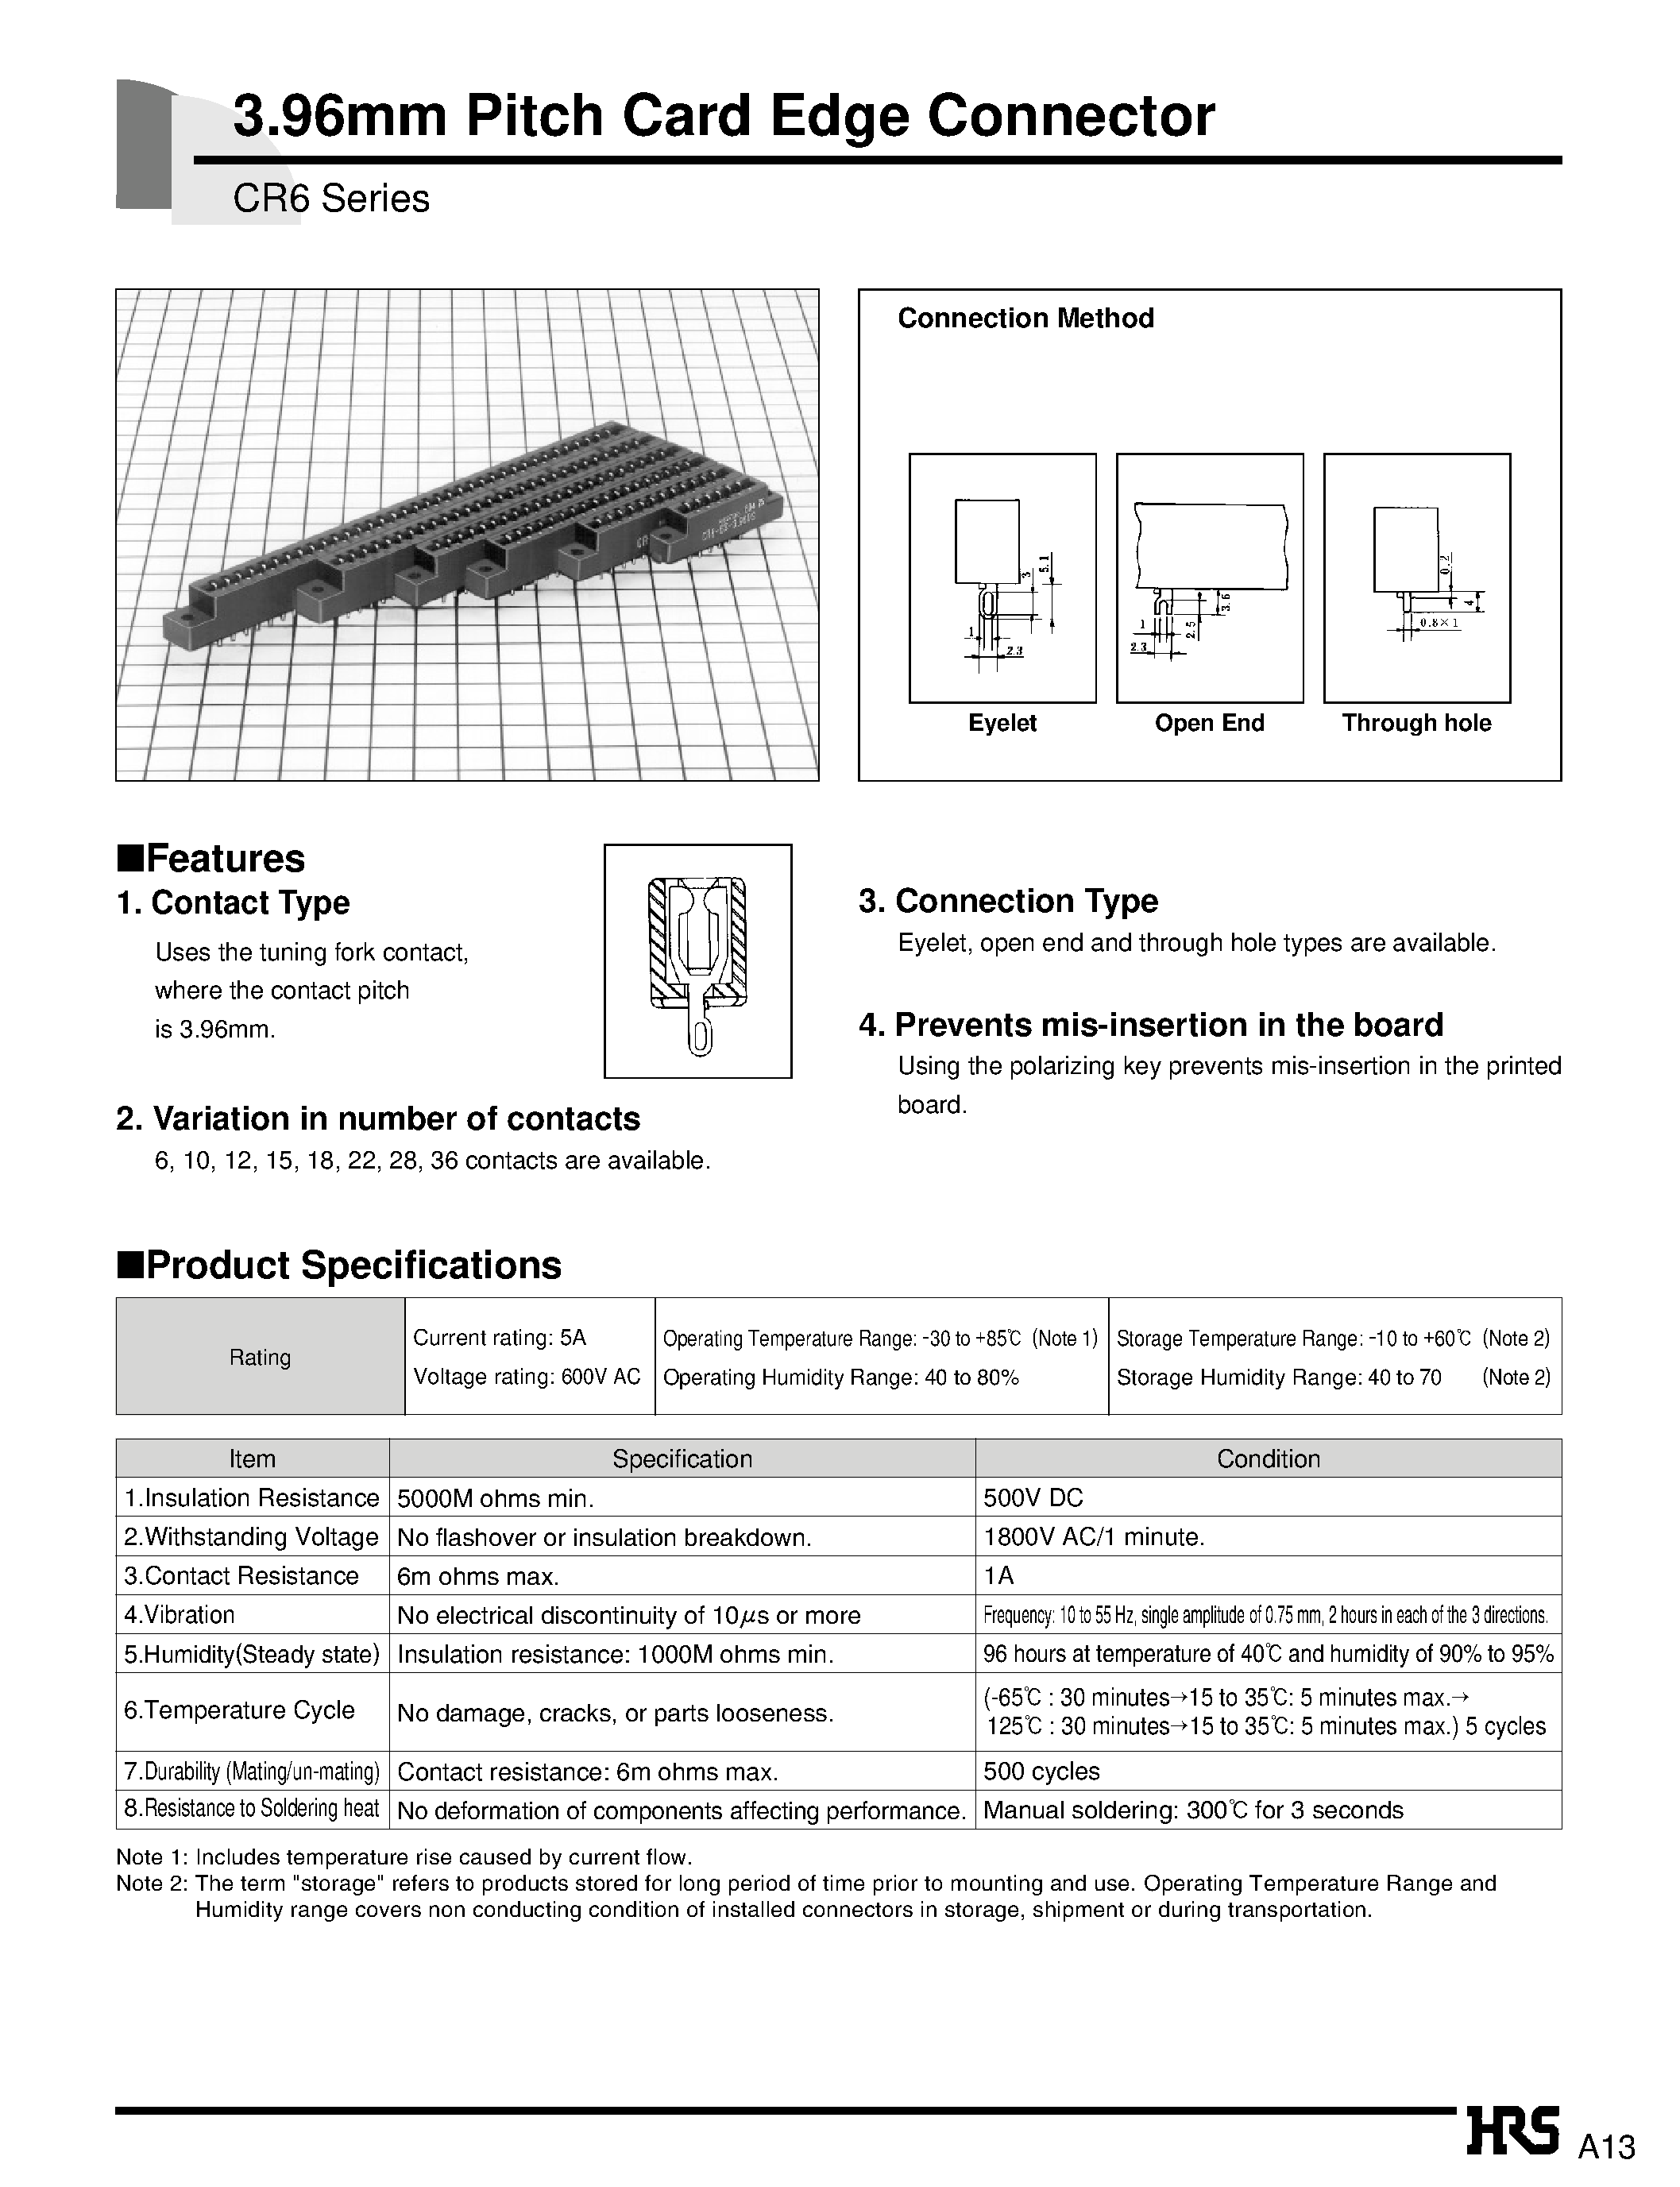 Datasheet CR6-22S-3.96E - 3.96mm Pitch Card Edge Connector page 1